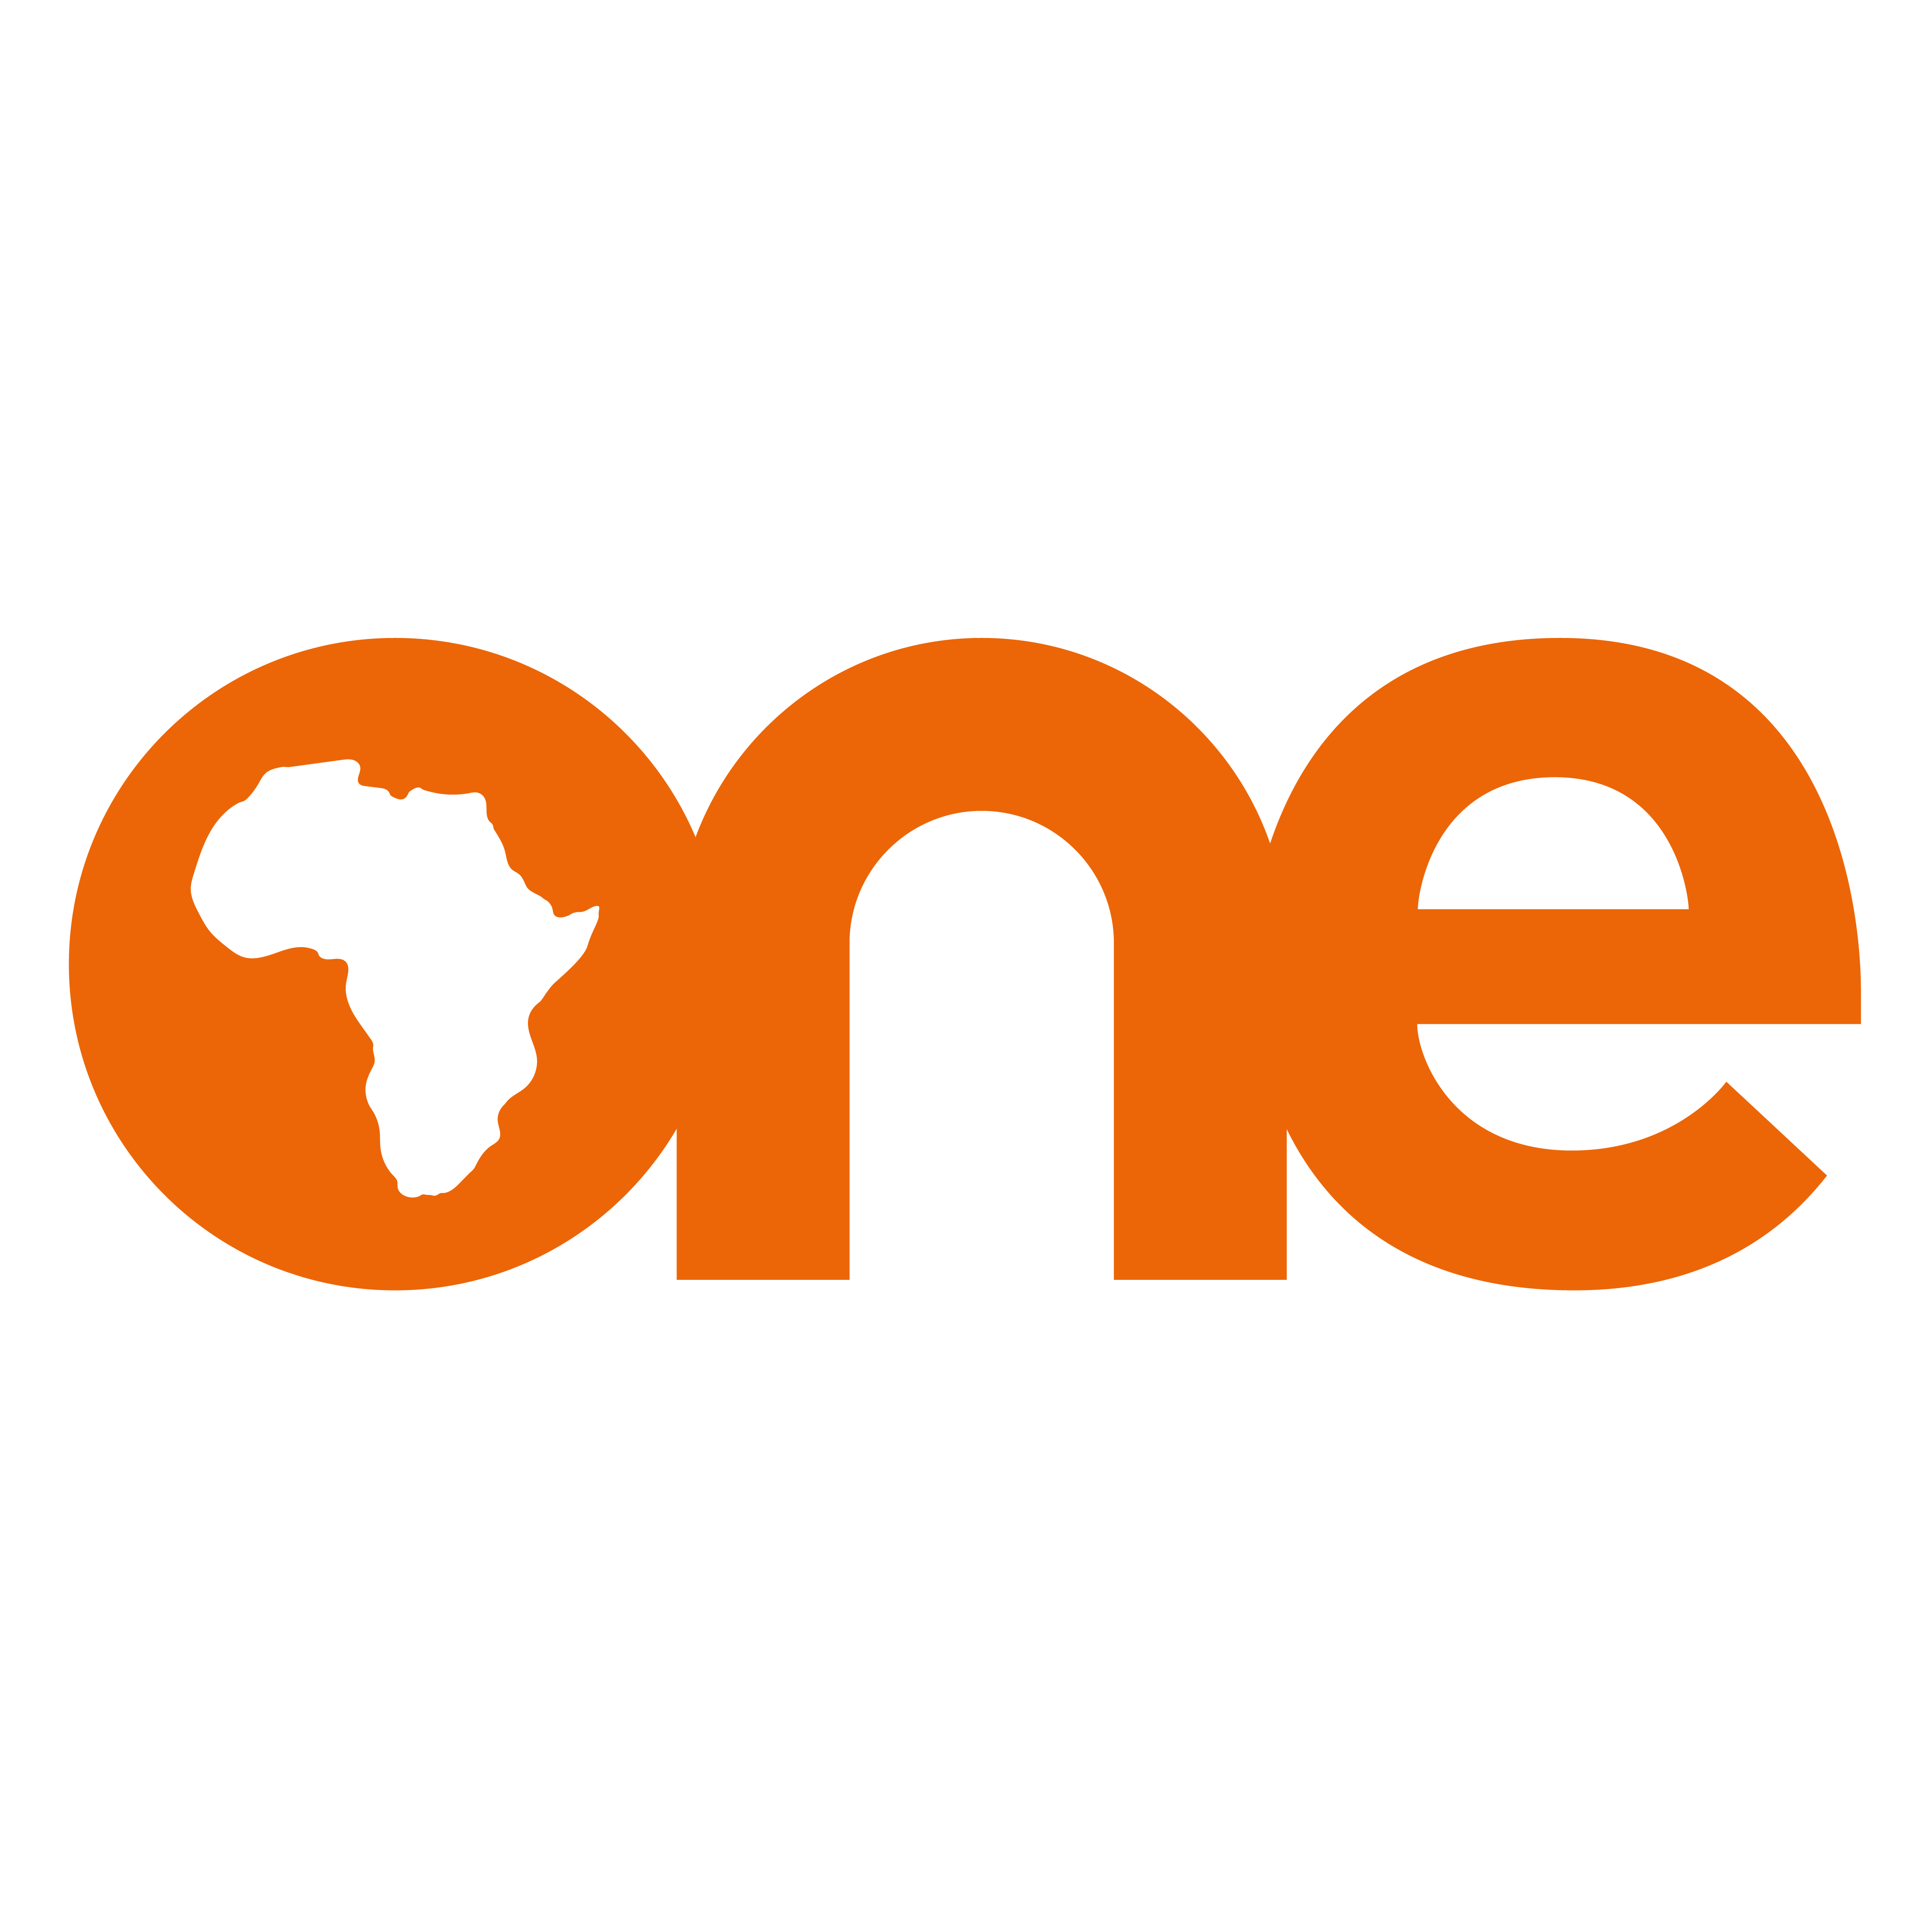 (c) Oneafrica.tv